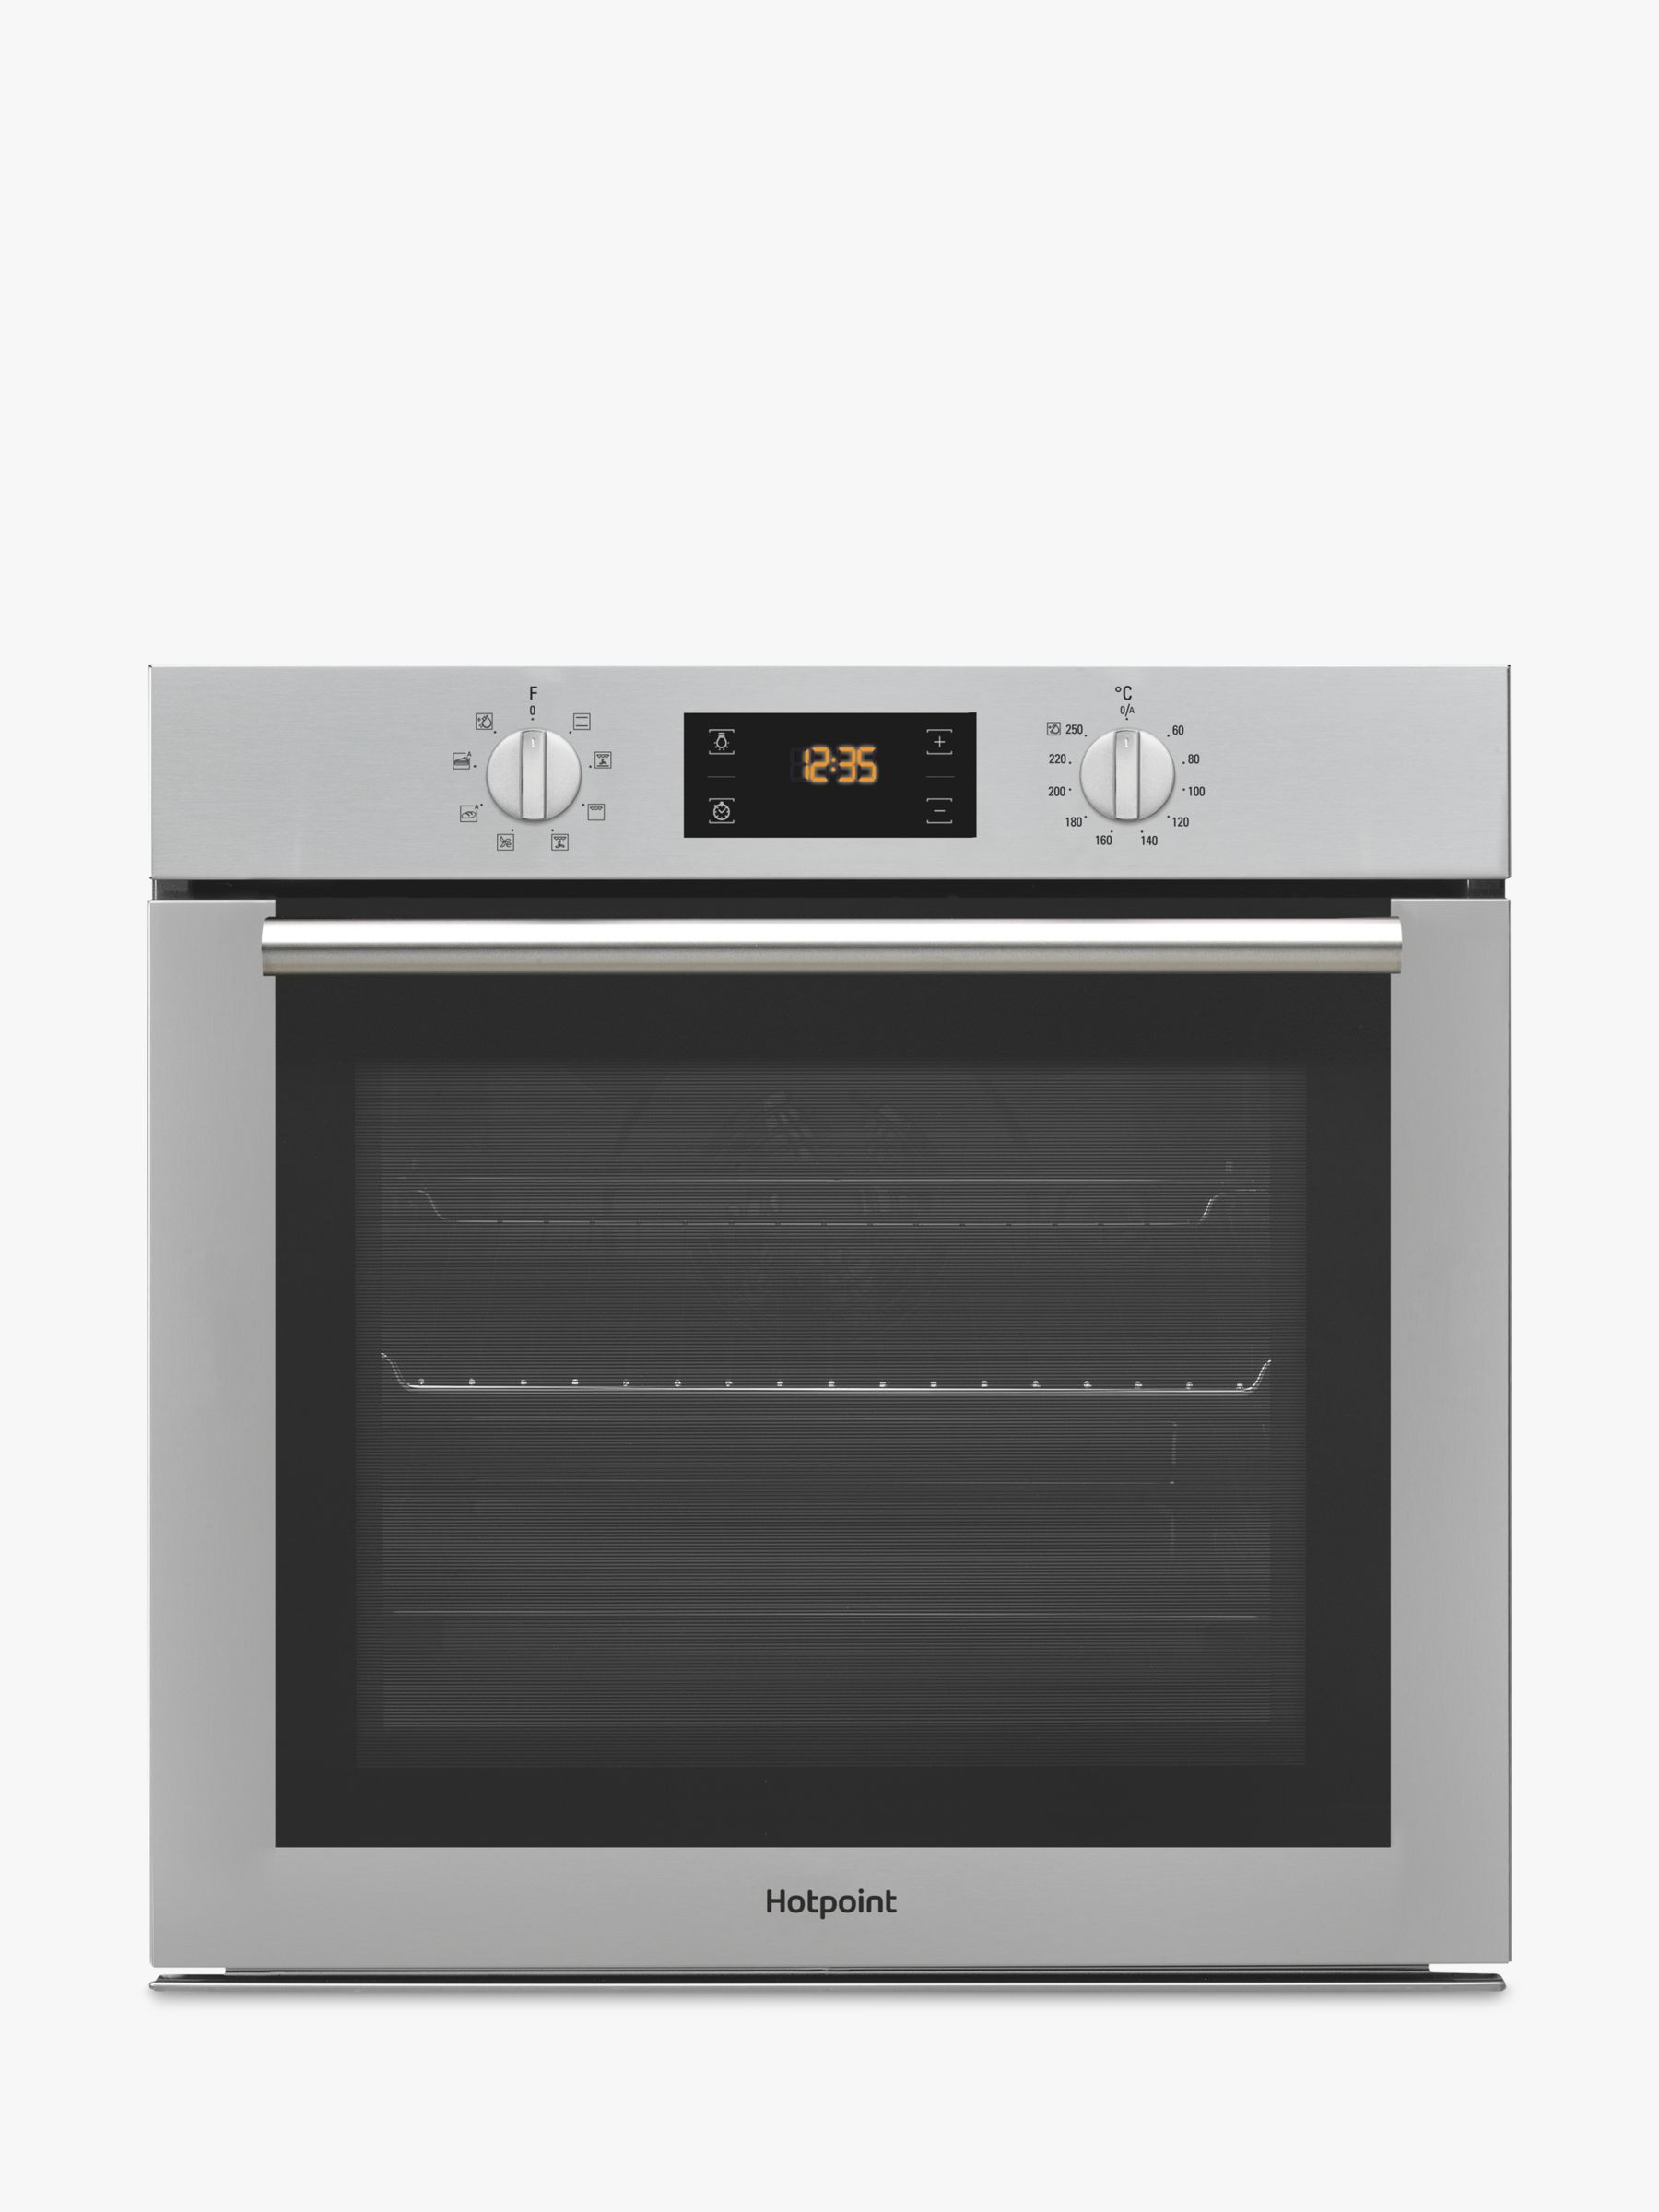 Hotpoint SA4544HIX Class 4 Built In Electric Single Oven, Stainless Steel